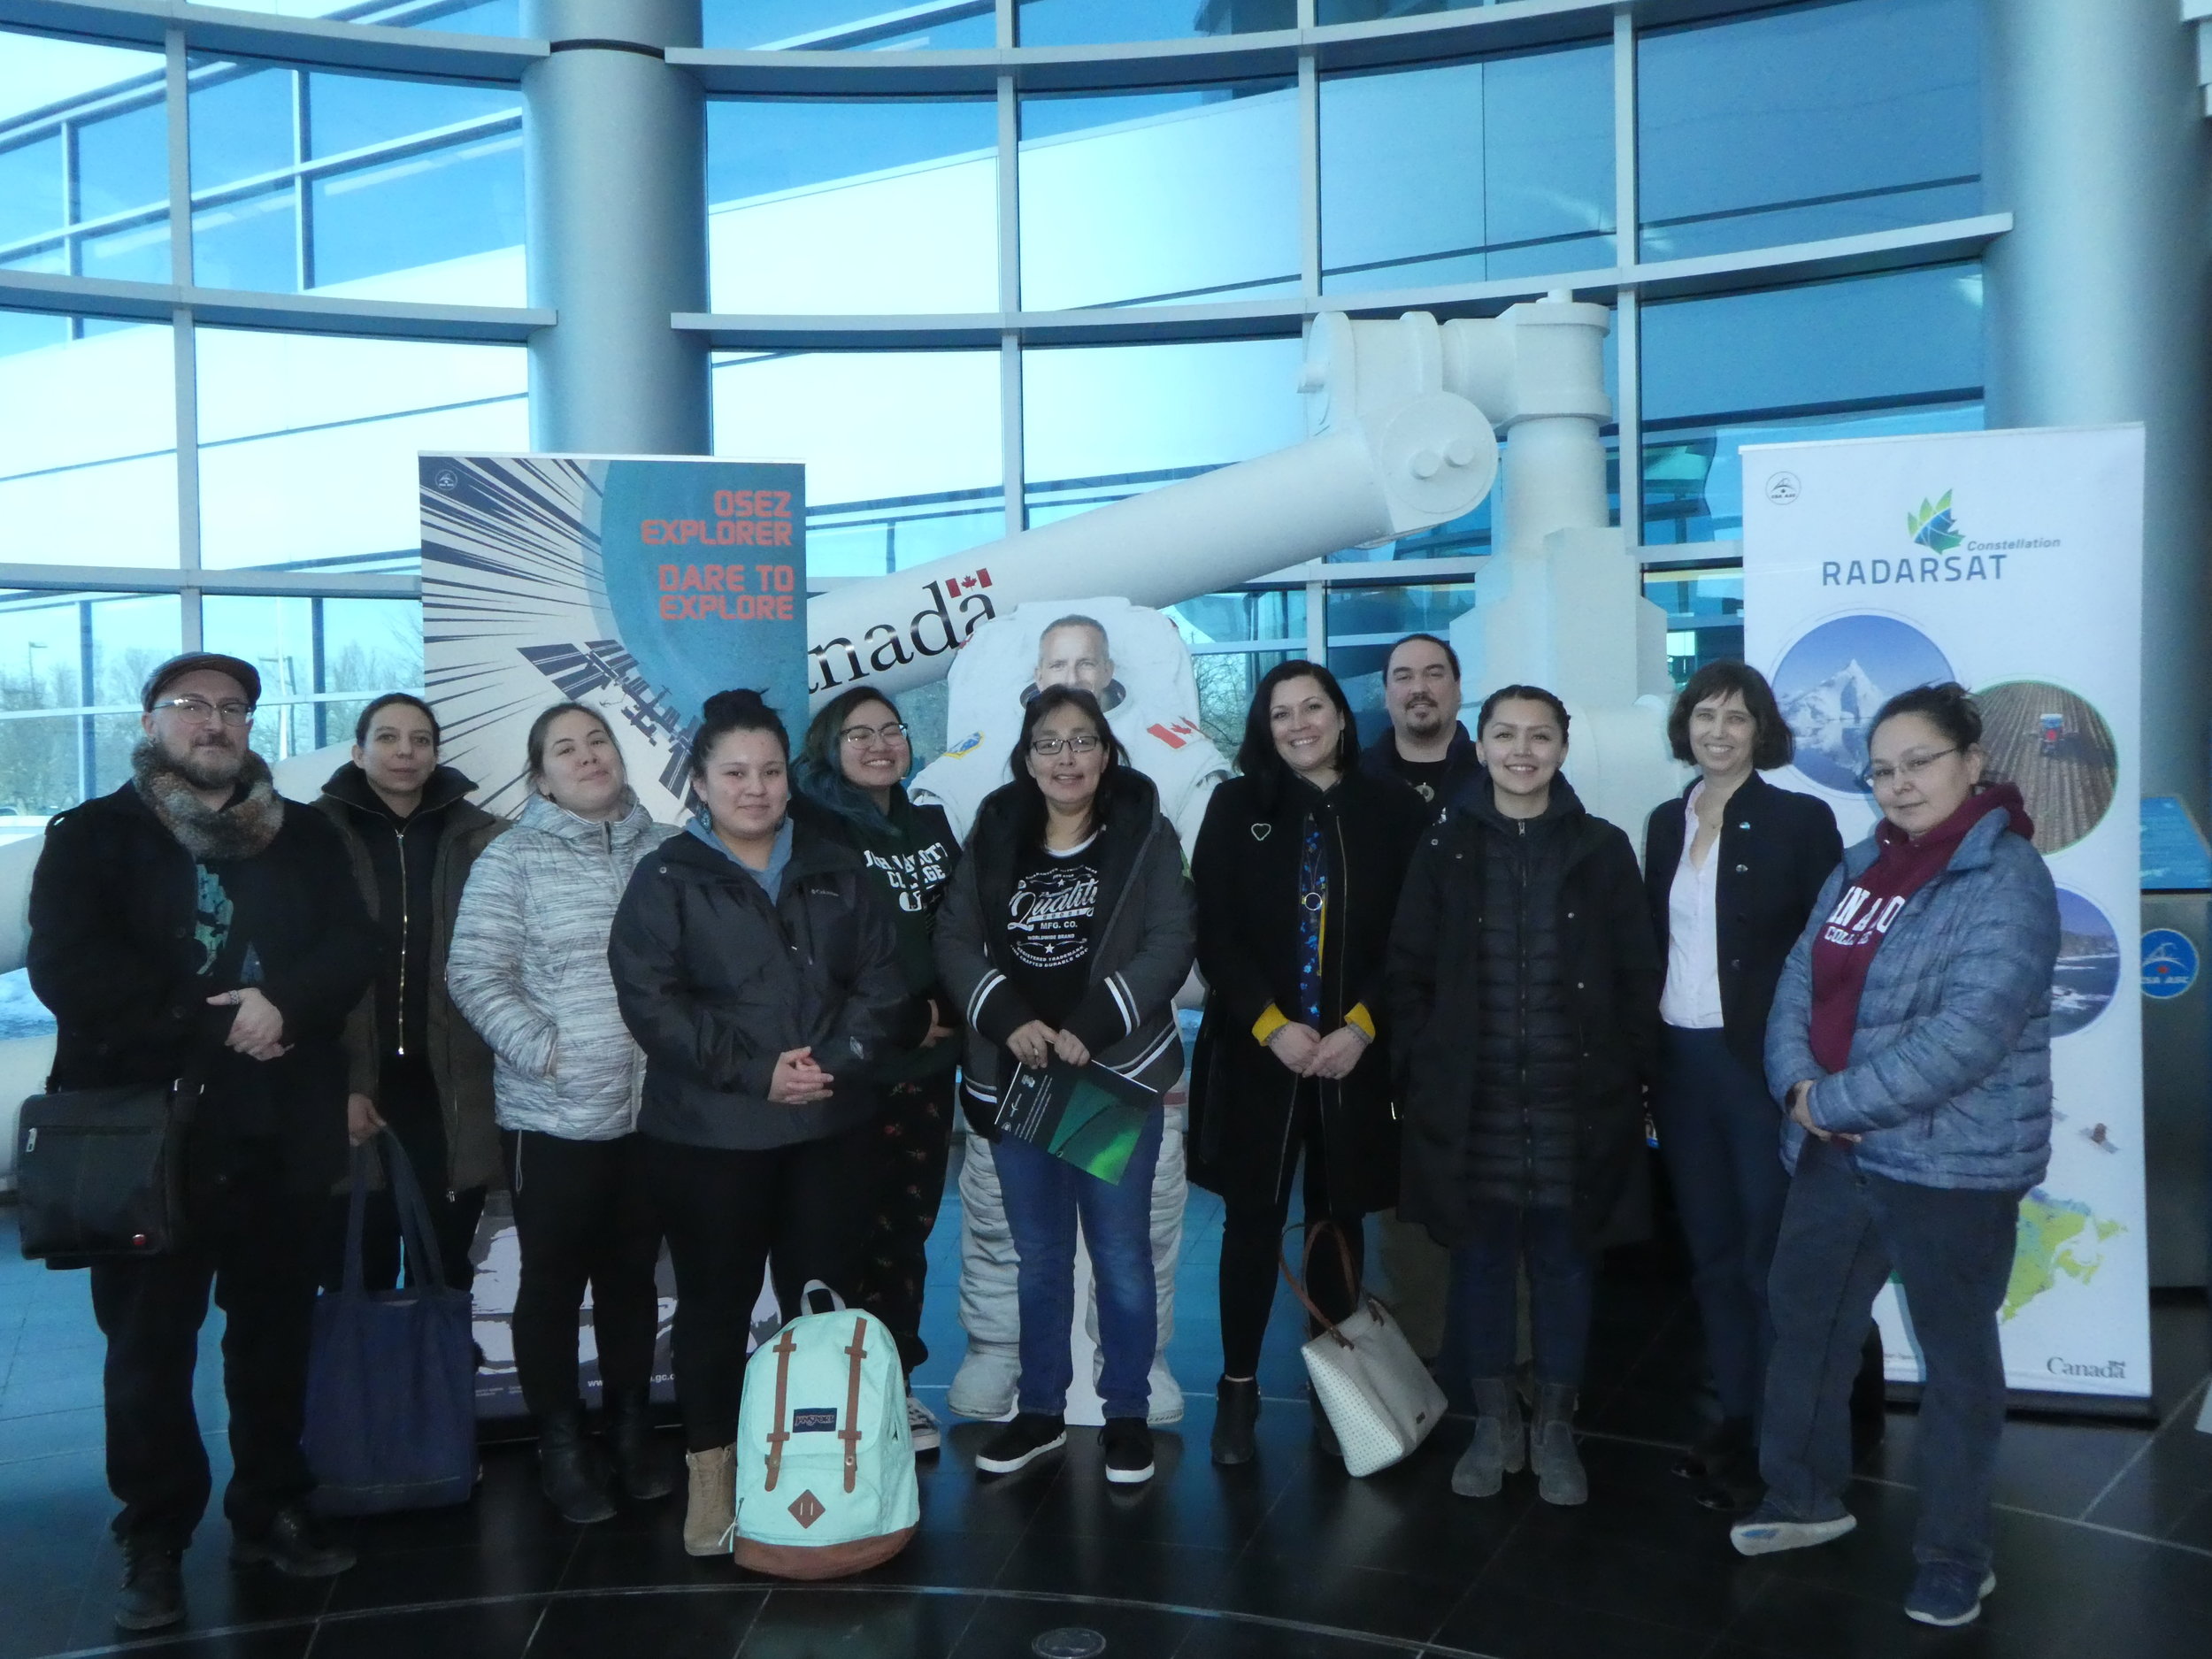  Visit to the Canadian Space Agency with CEGEP Nunavik Sivunitsavut students, Dr. Heather Igloliorte and artists Glenn Gear, Jesse Tungilik, March 25, 2019. 